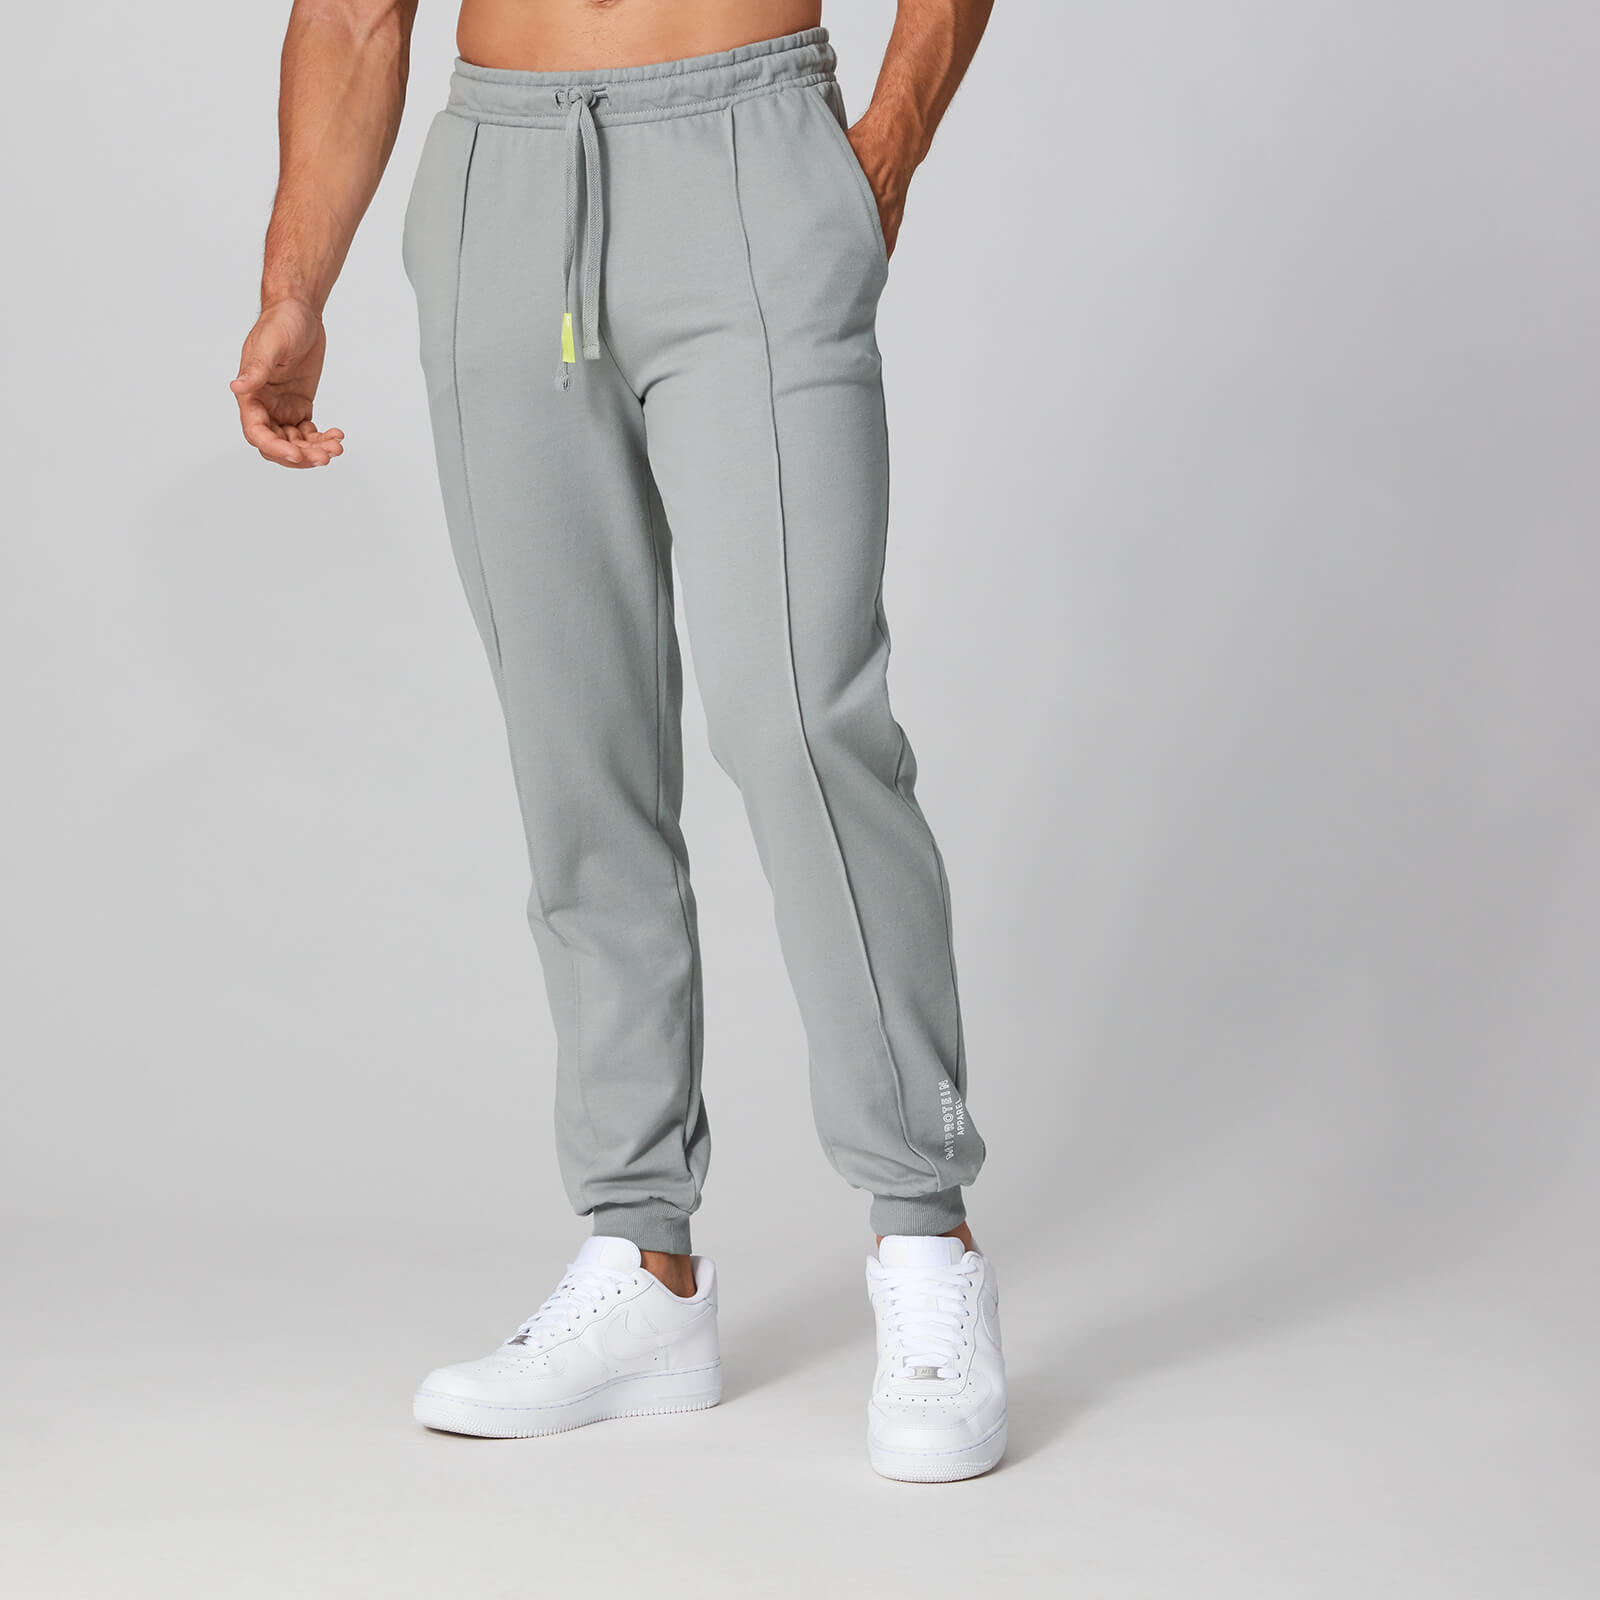 Myprotein Signature Joggers - Alloy - XS